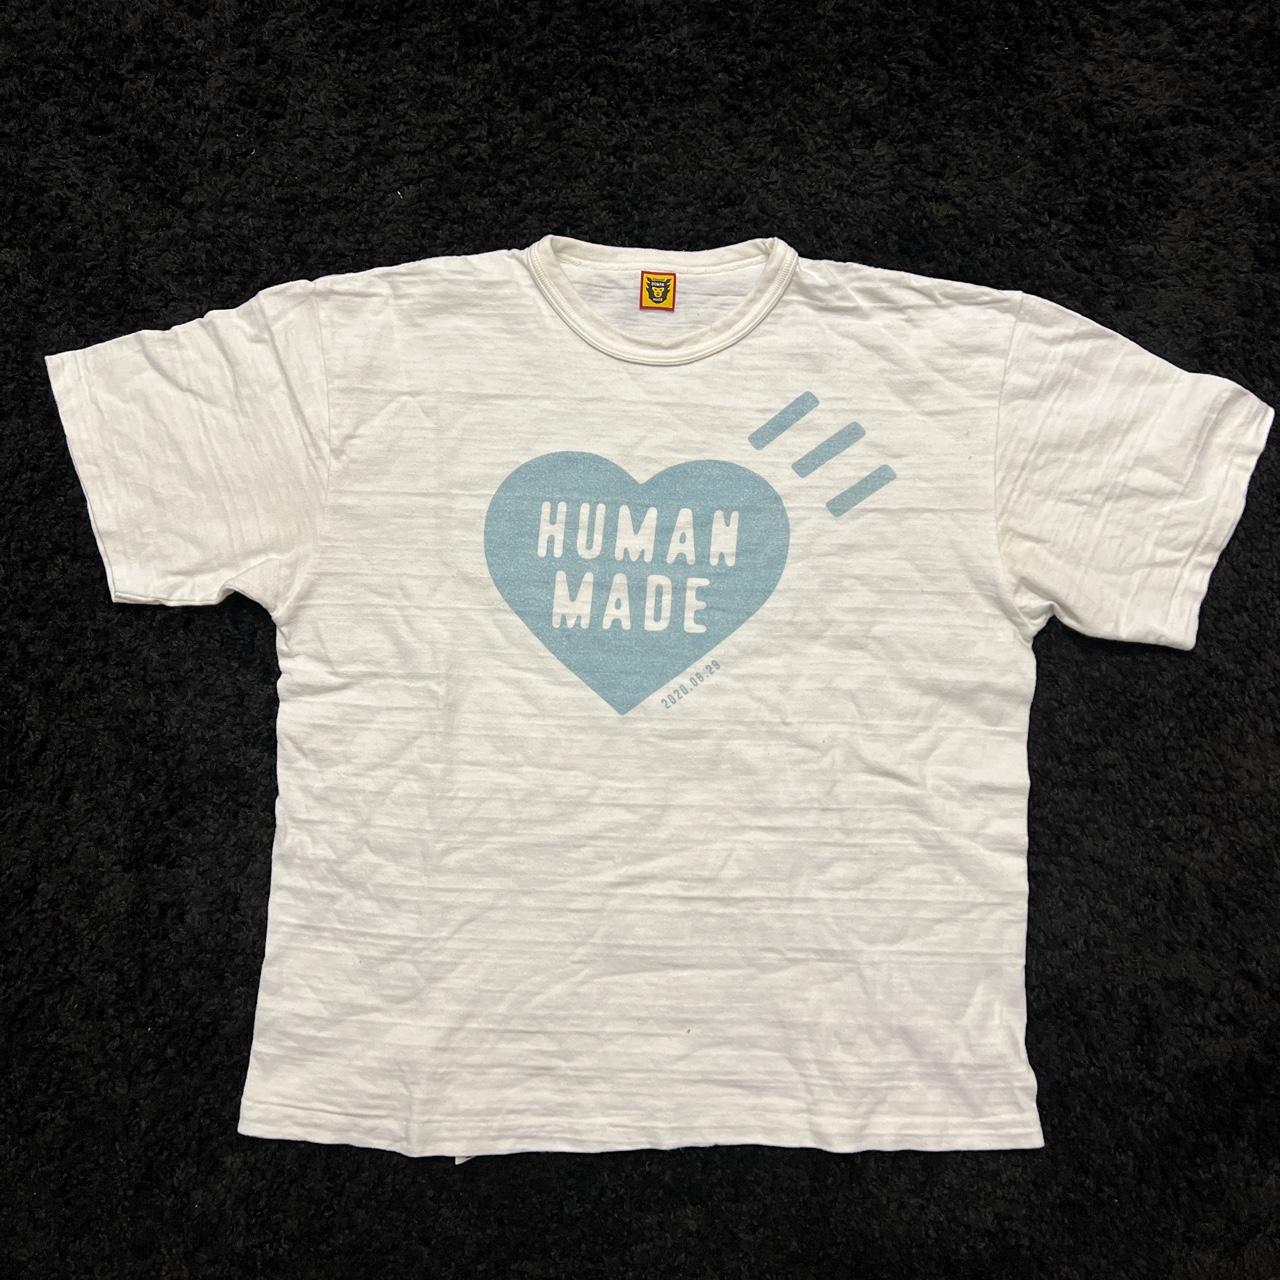 Human Made Men's White and Blue T-shirt